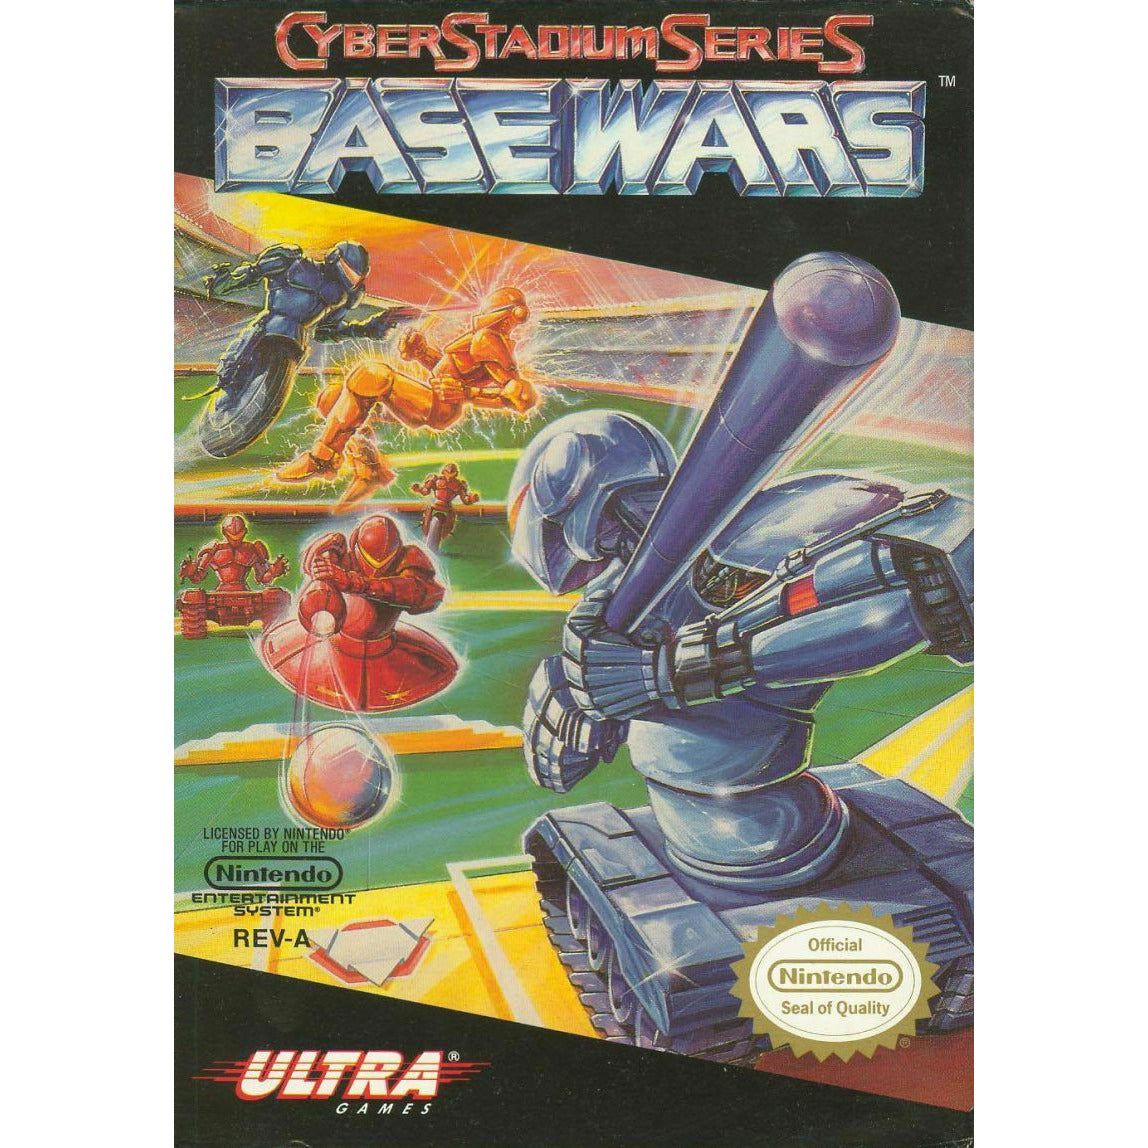 NES - Cyber Stadium Series Base Wars (Complete In Box)